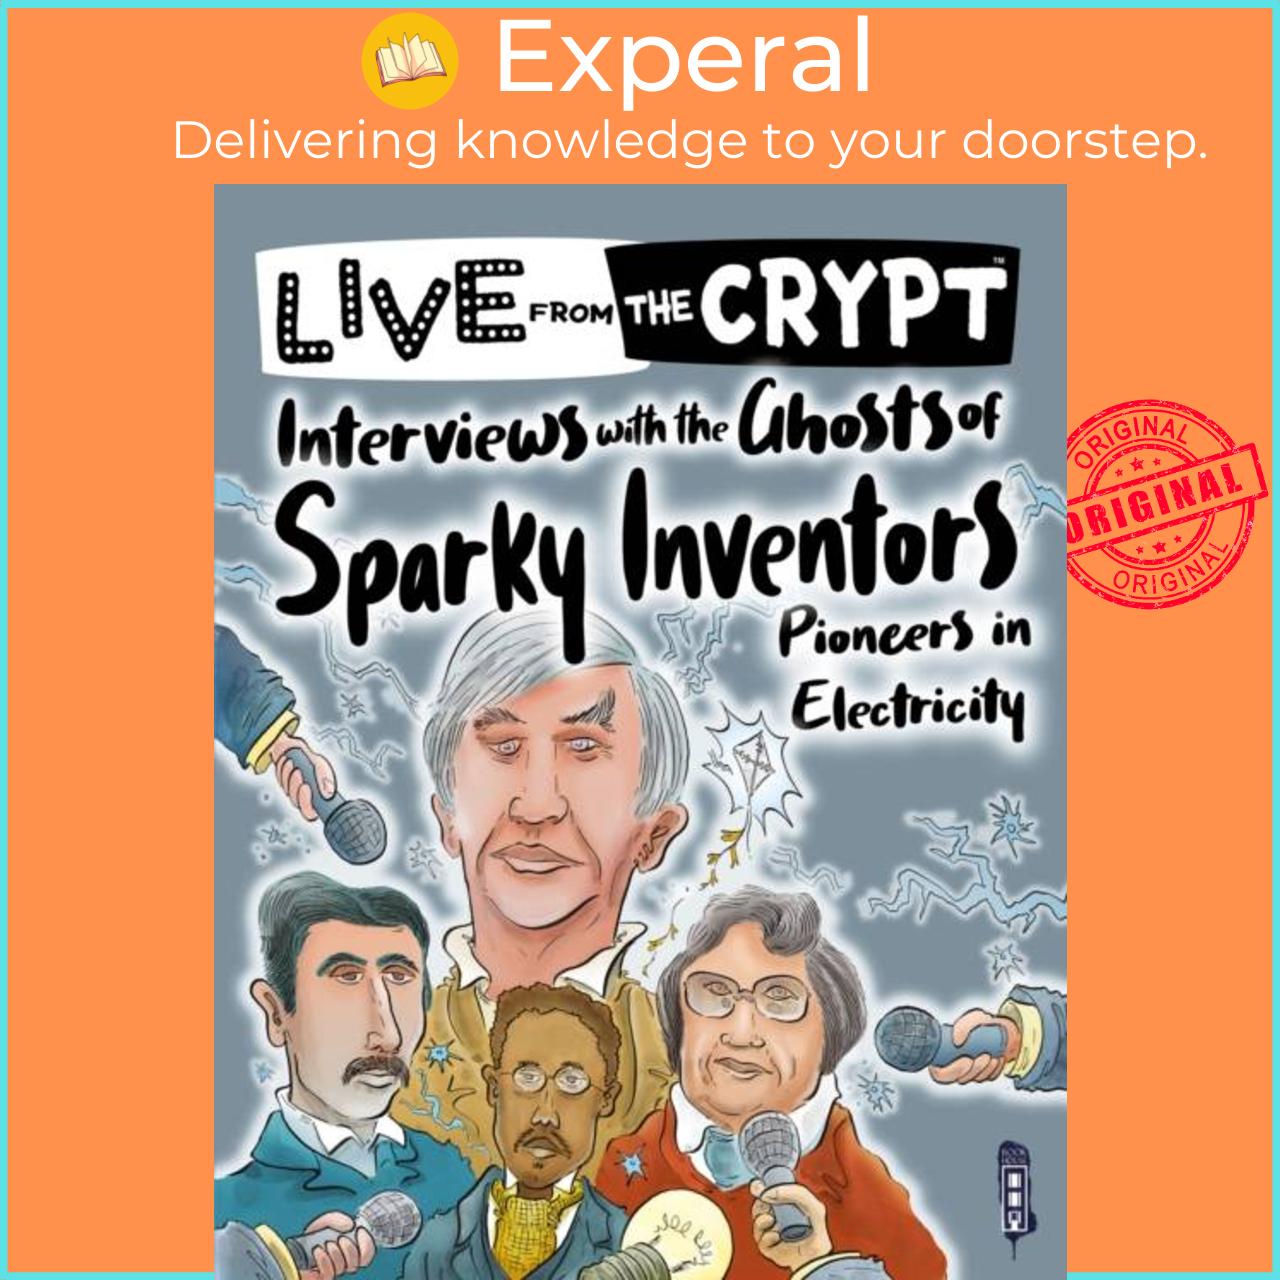 Sách - Interviews with the ghosts of sparky inventors by Rory Walker (UK edition, paperback)